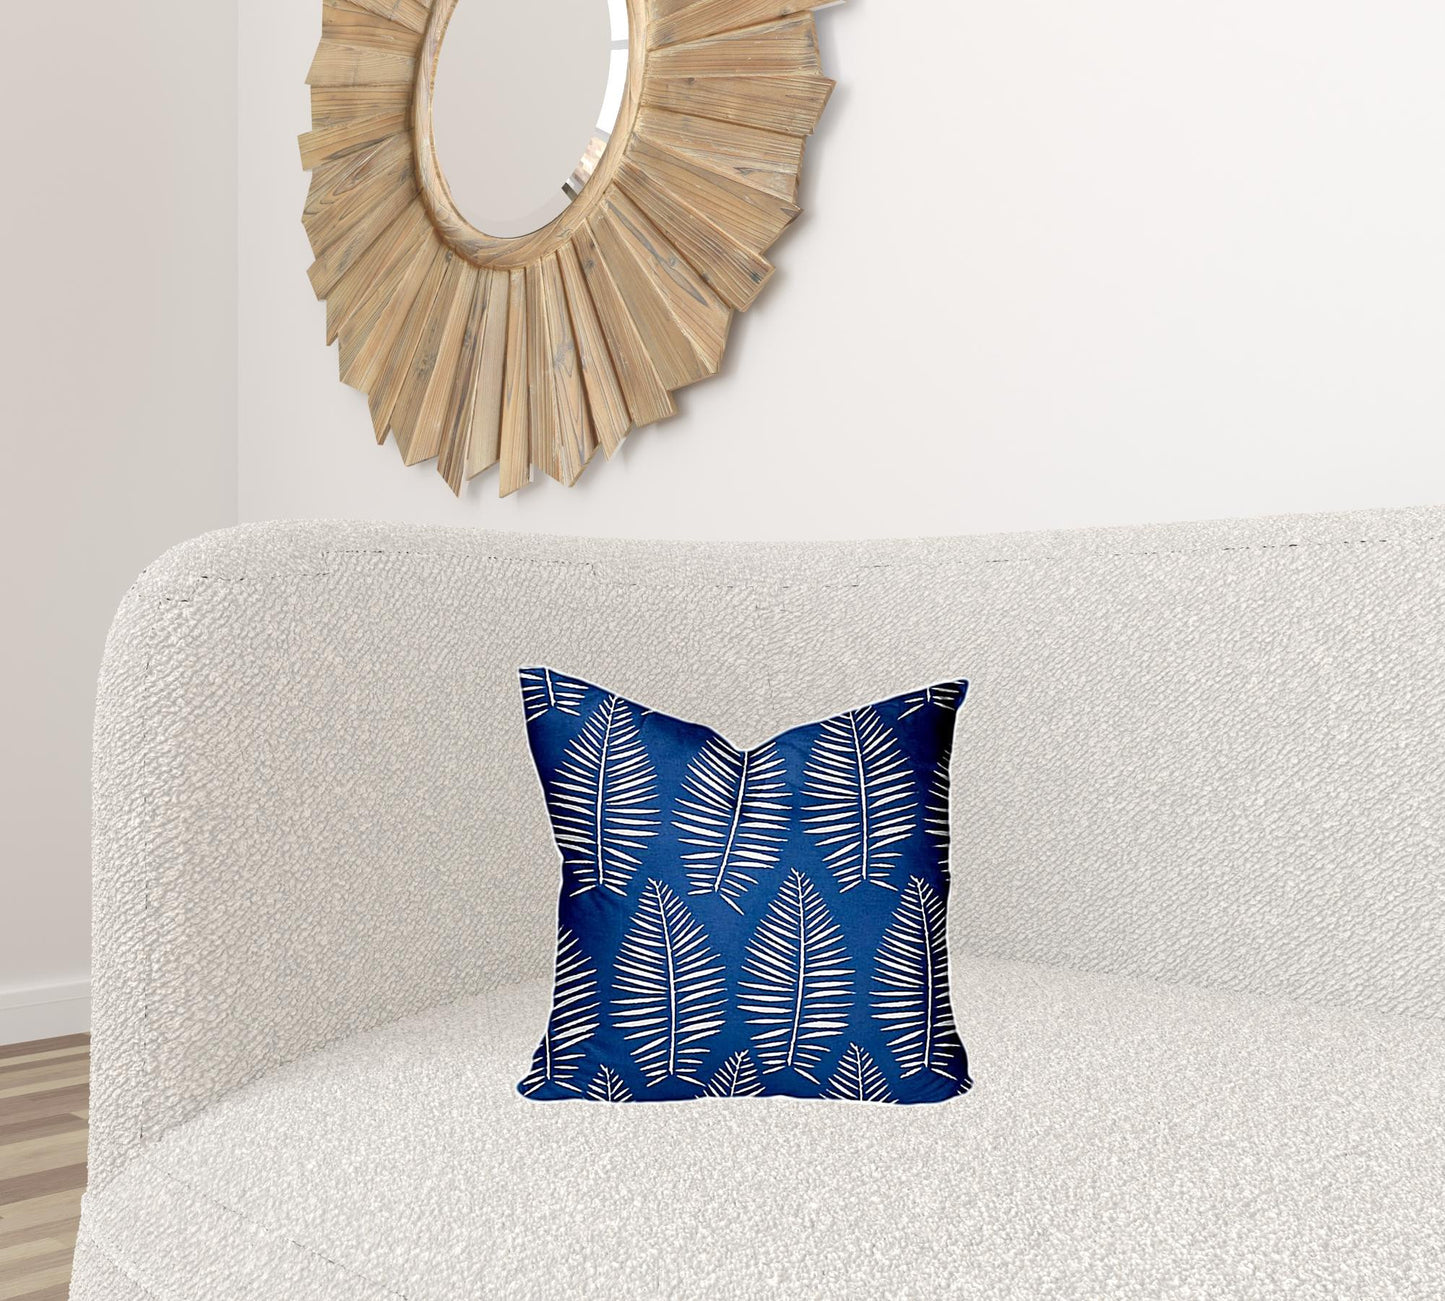 16" X 16" Blue And White Enveloped Tropical Throw Indoor Outdoor Pillow Cover